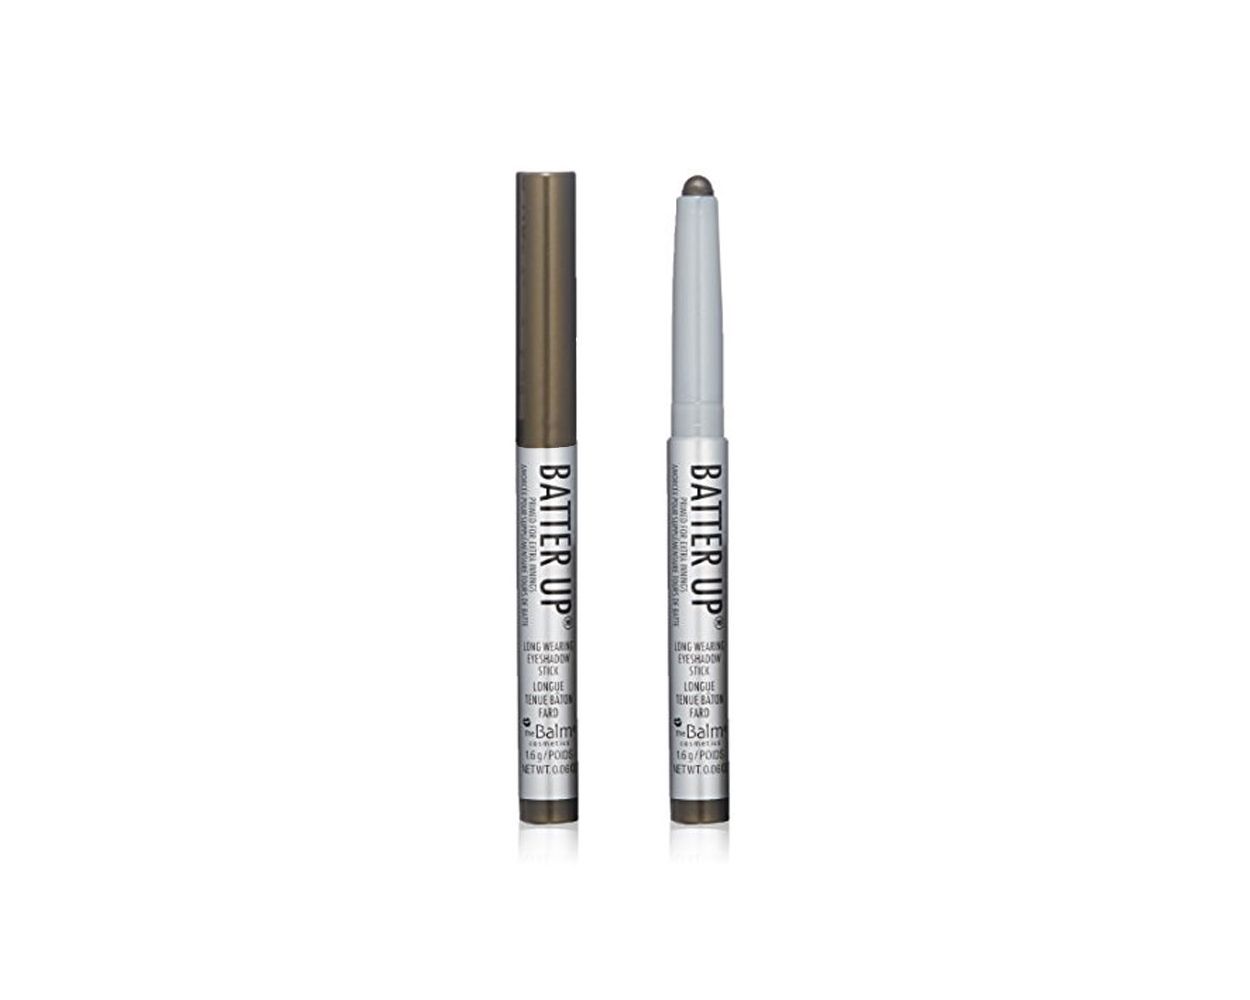 Batter Up Outfield Eyeshadow Stick